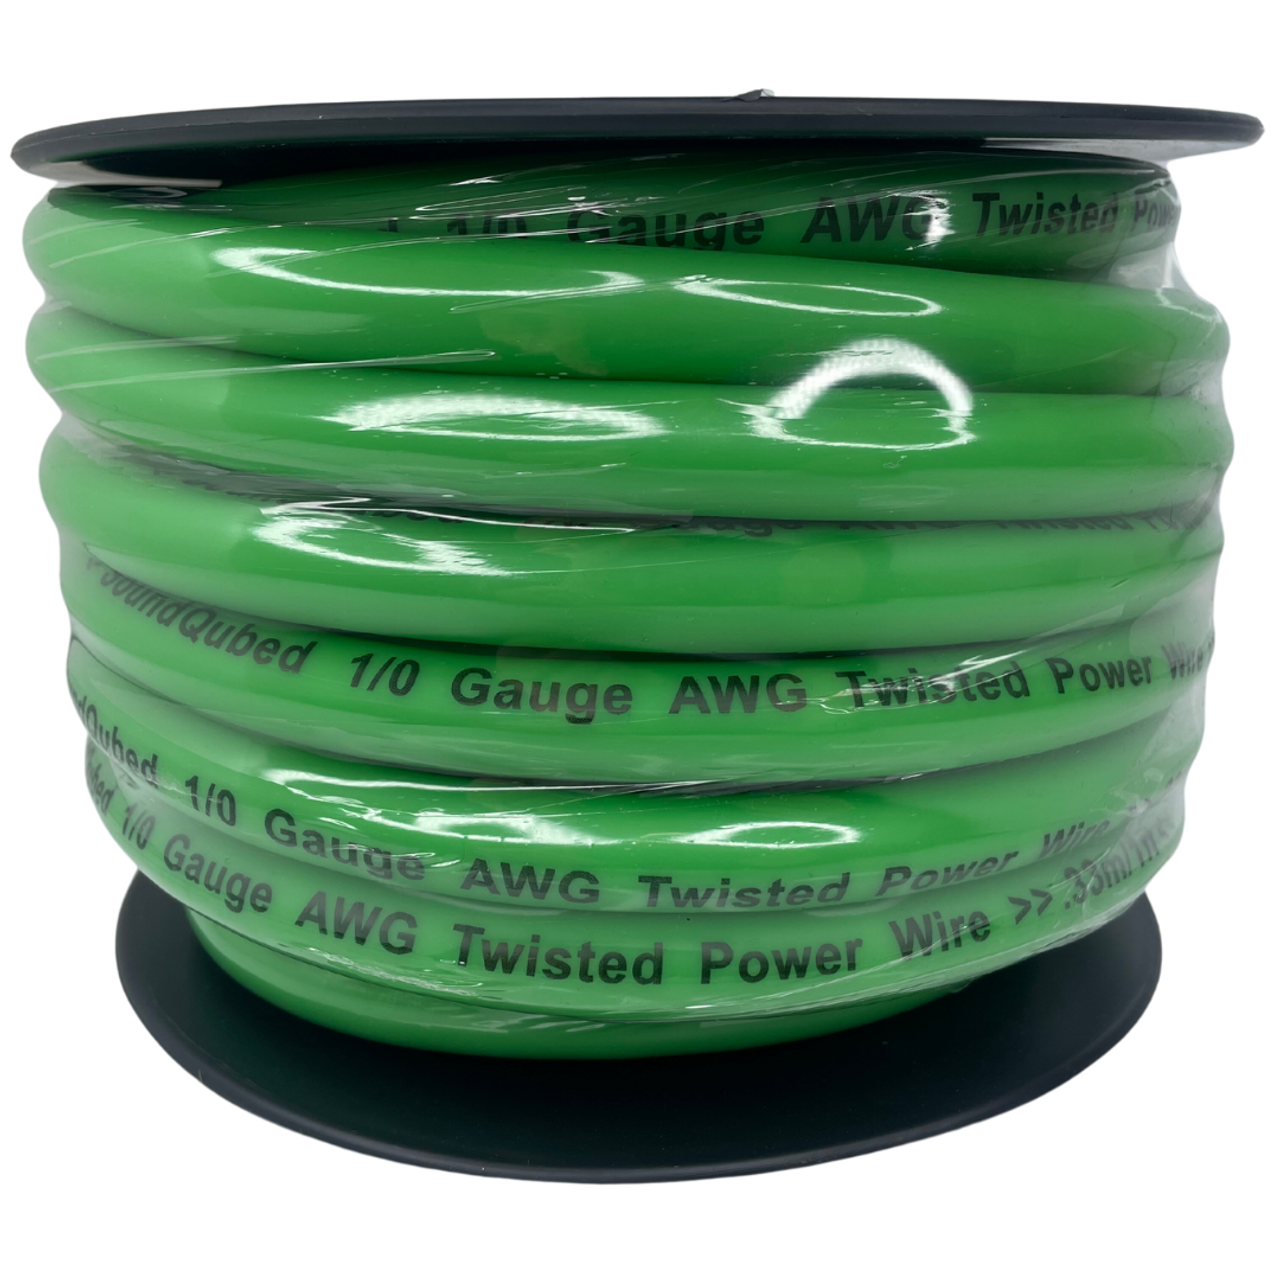 SOUNDQUBED 1/0 Power and Ground Wire (50ft spool)